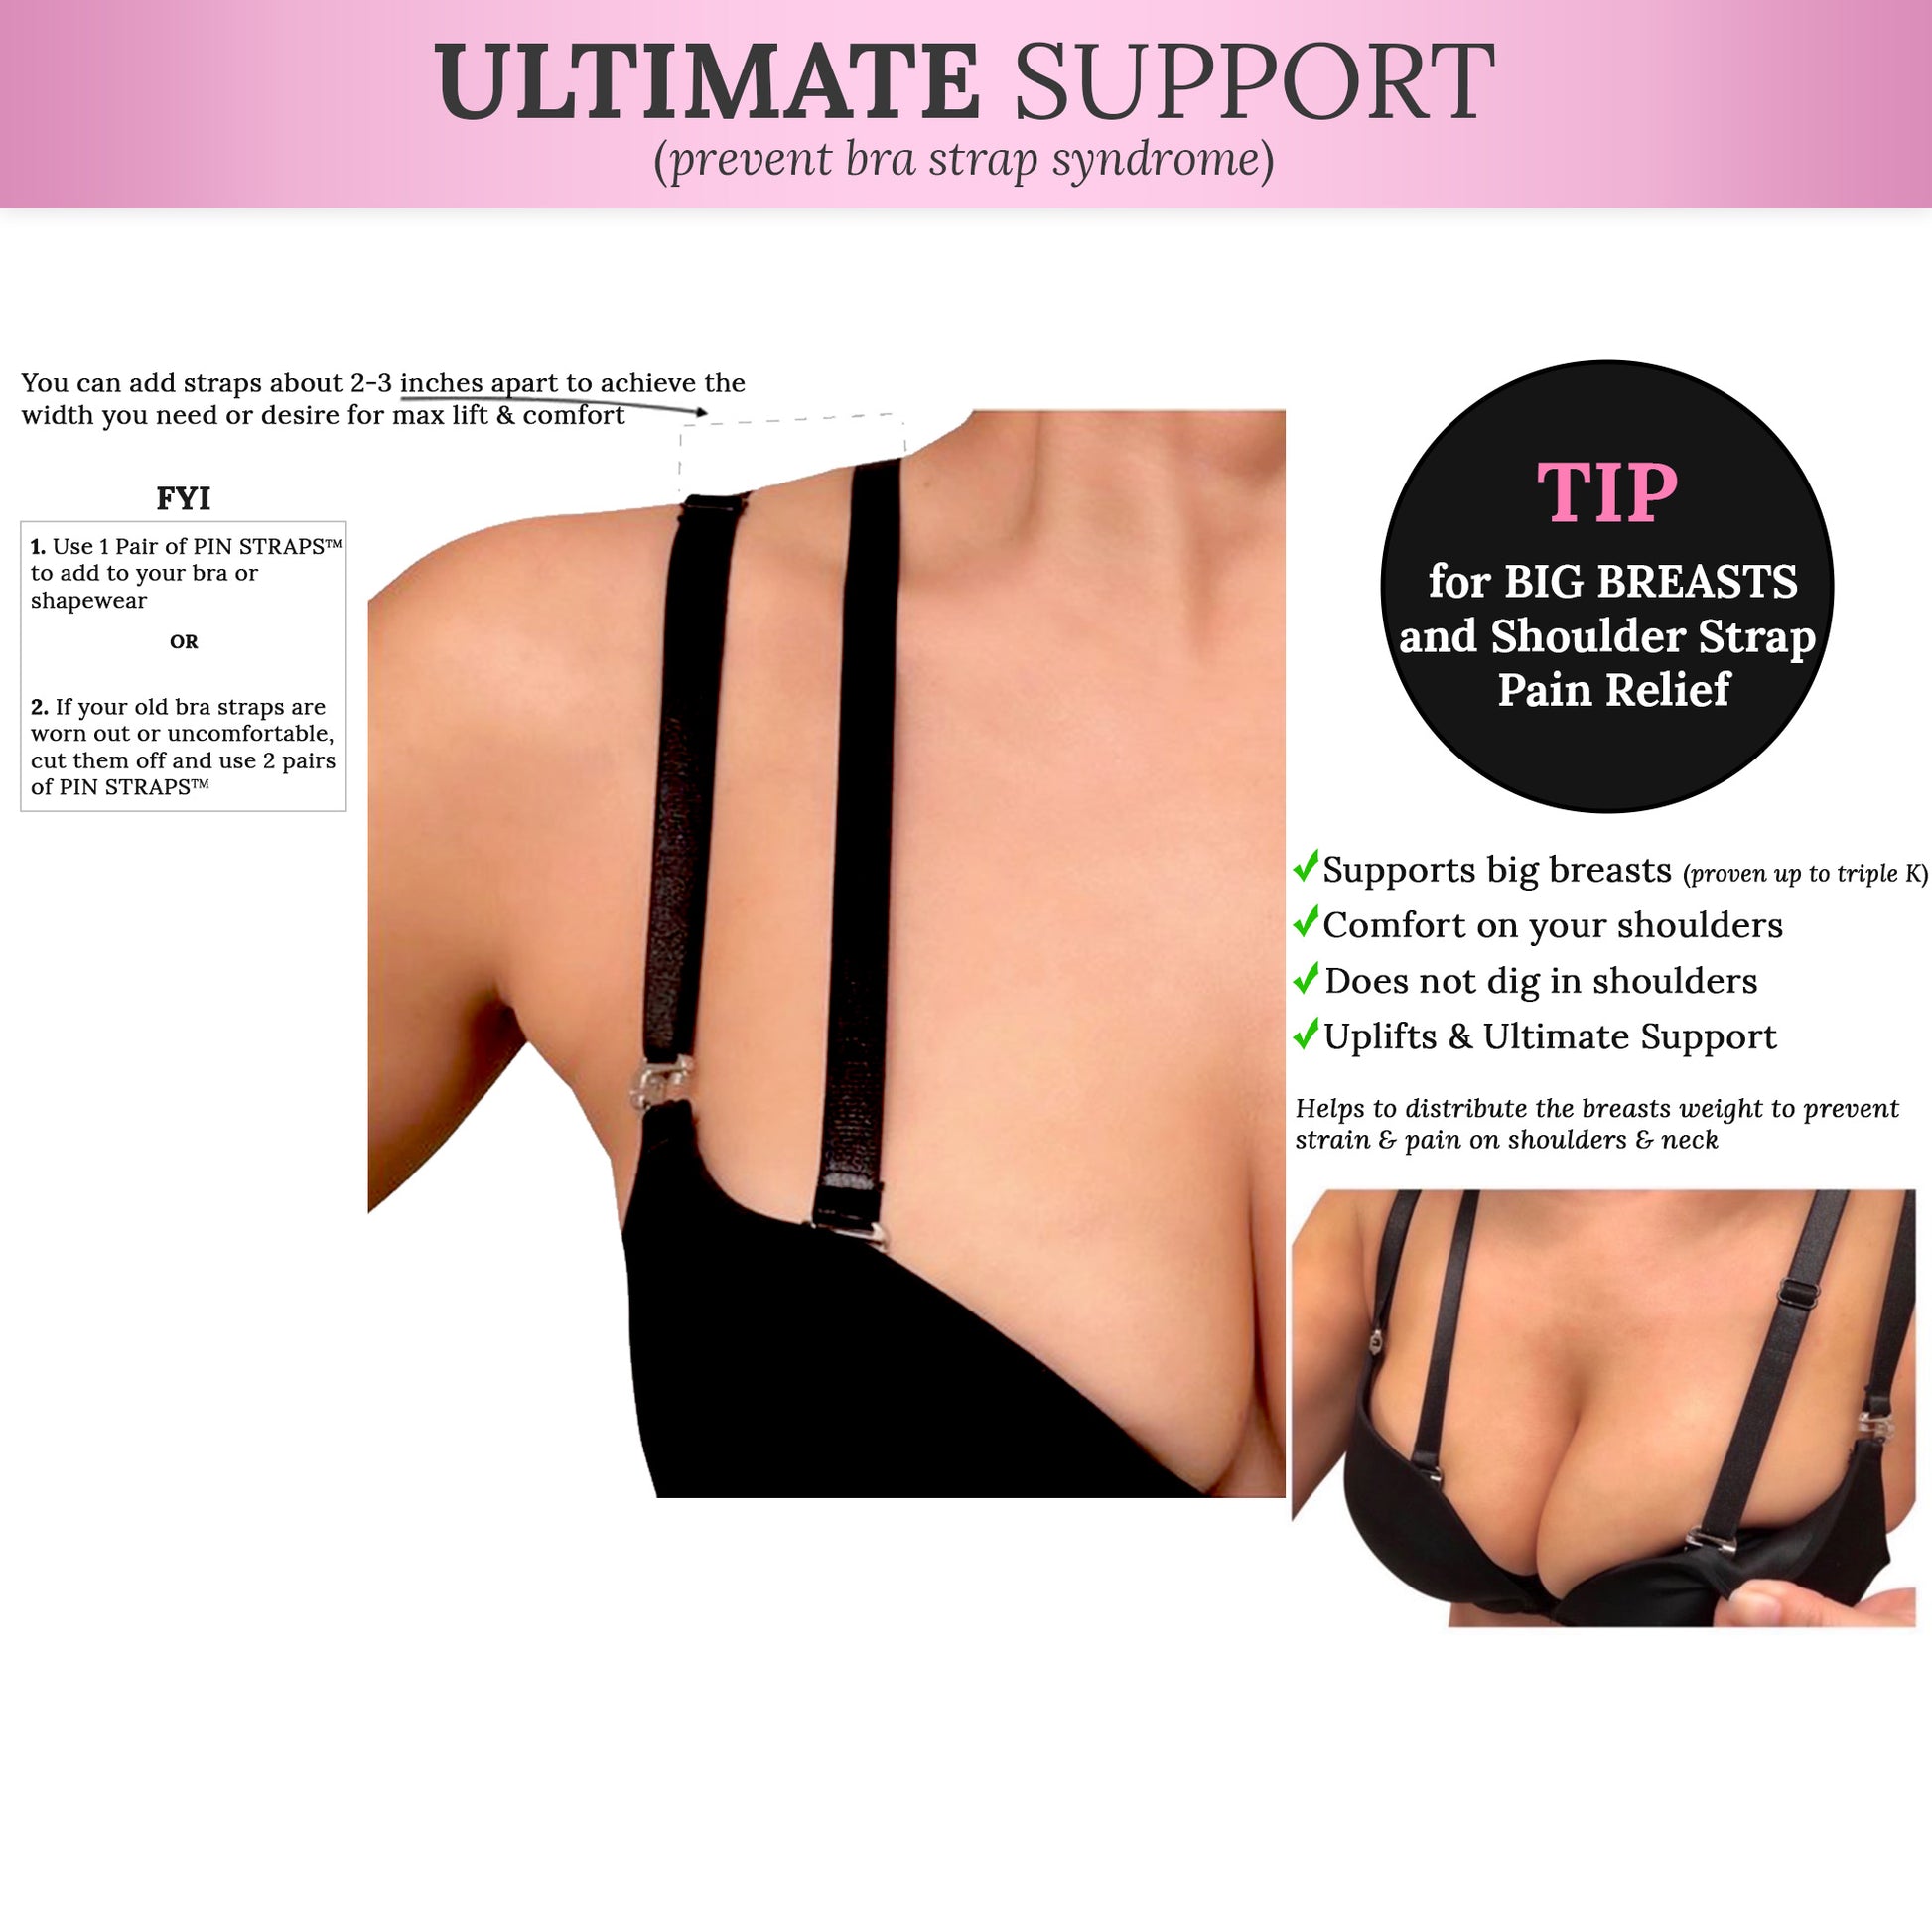 Find an ALL-IN-ONE replacement bra strap that offers all-day